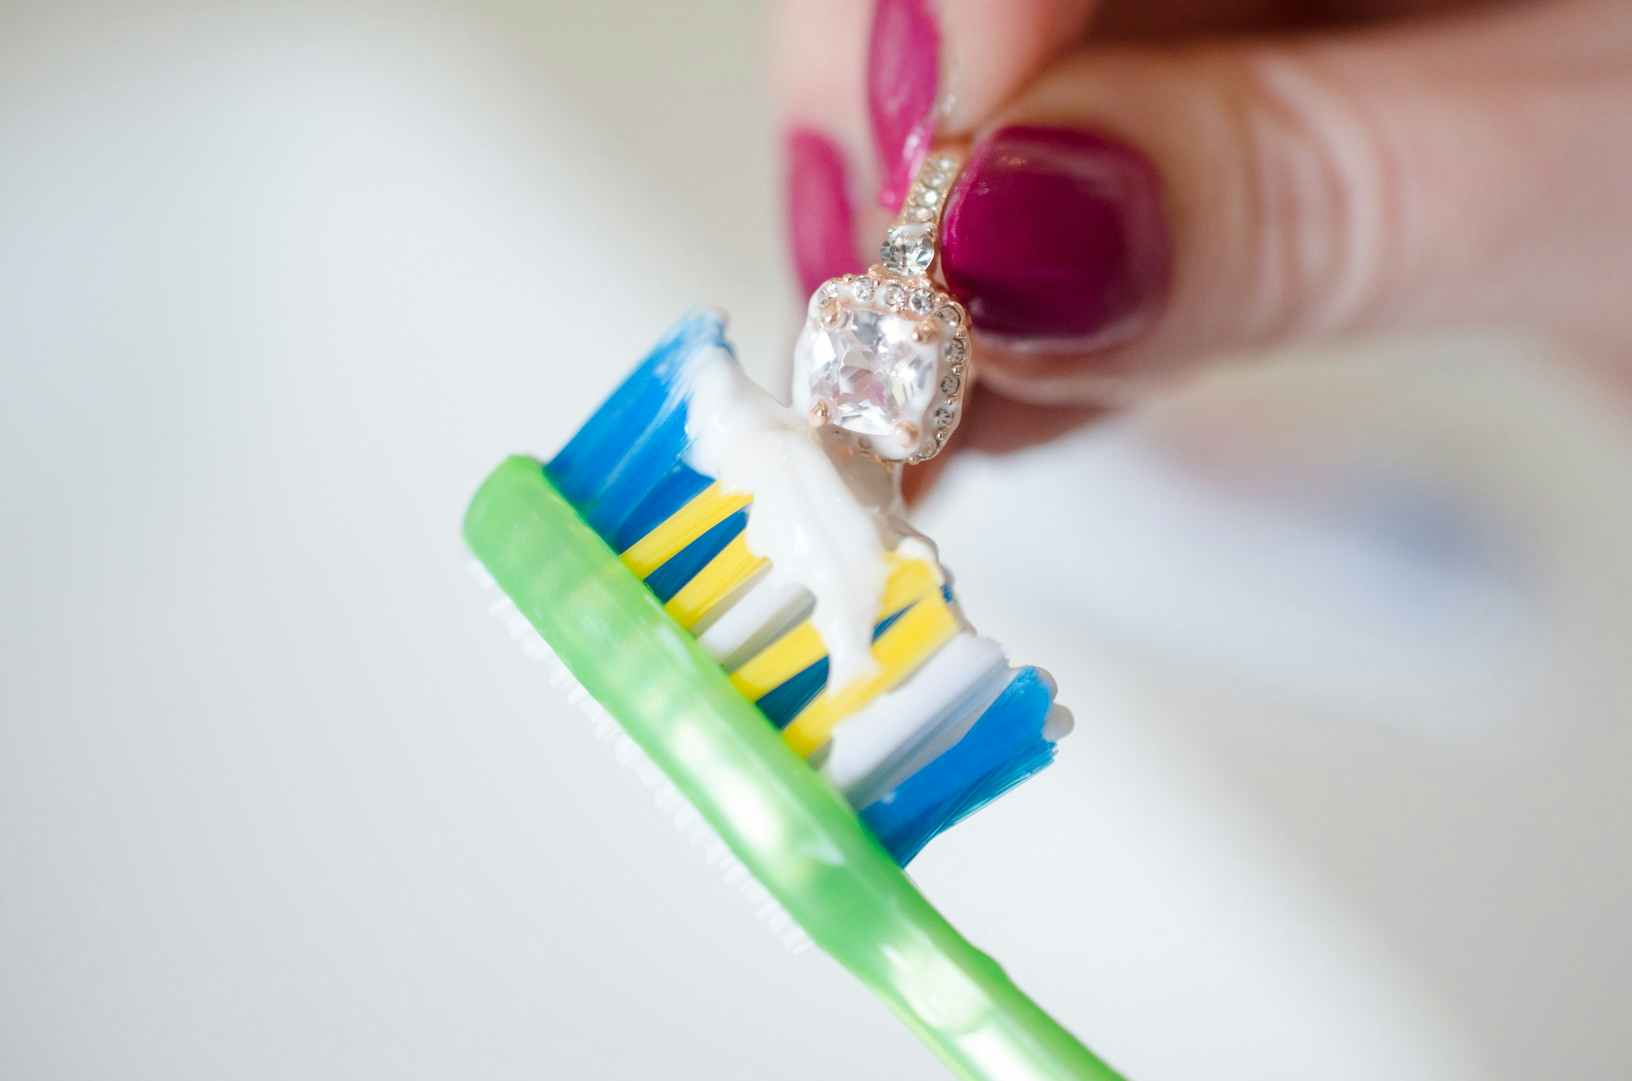 Someone using a toothbrush to clean a diamond ring